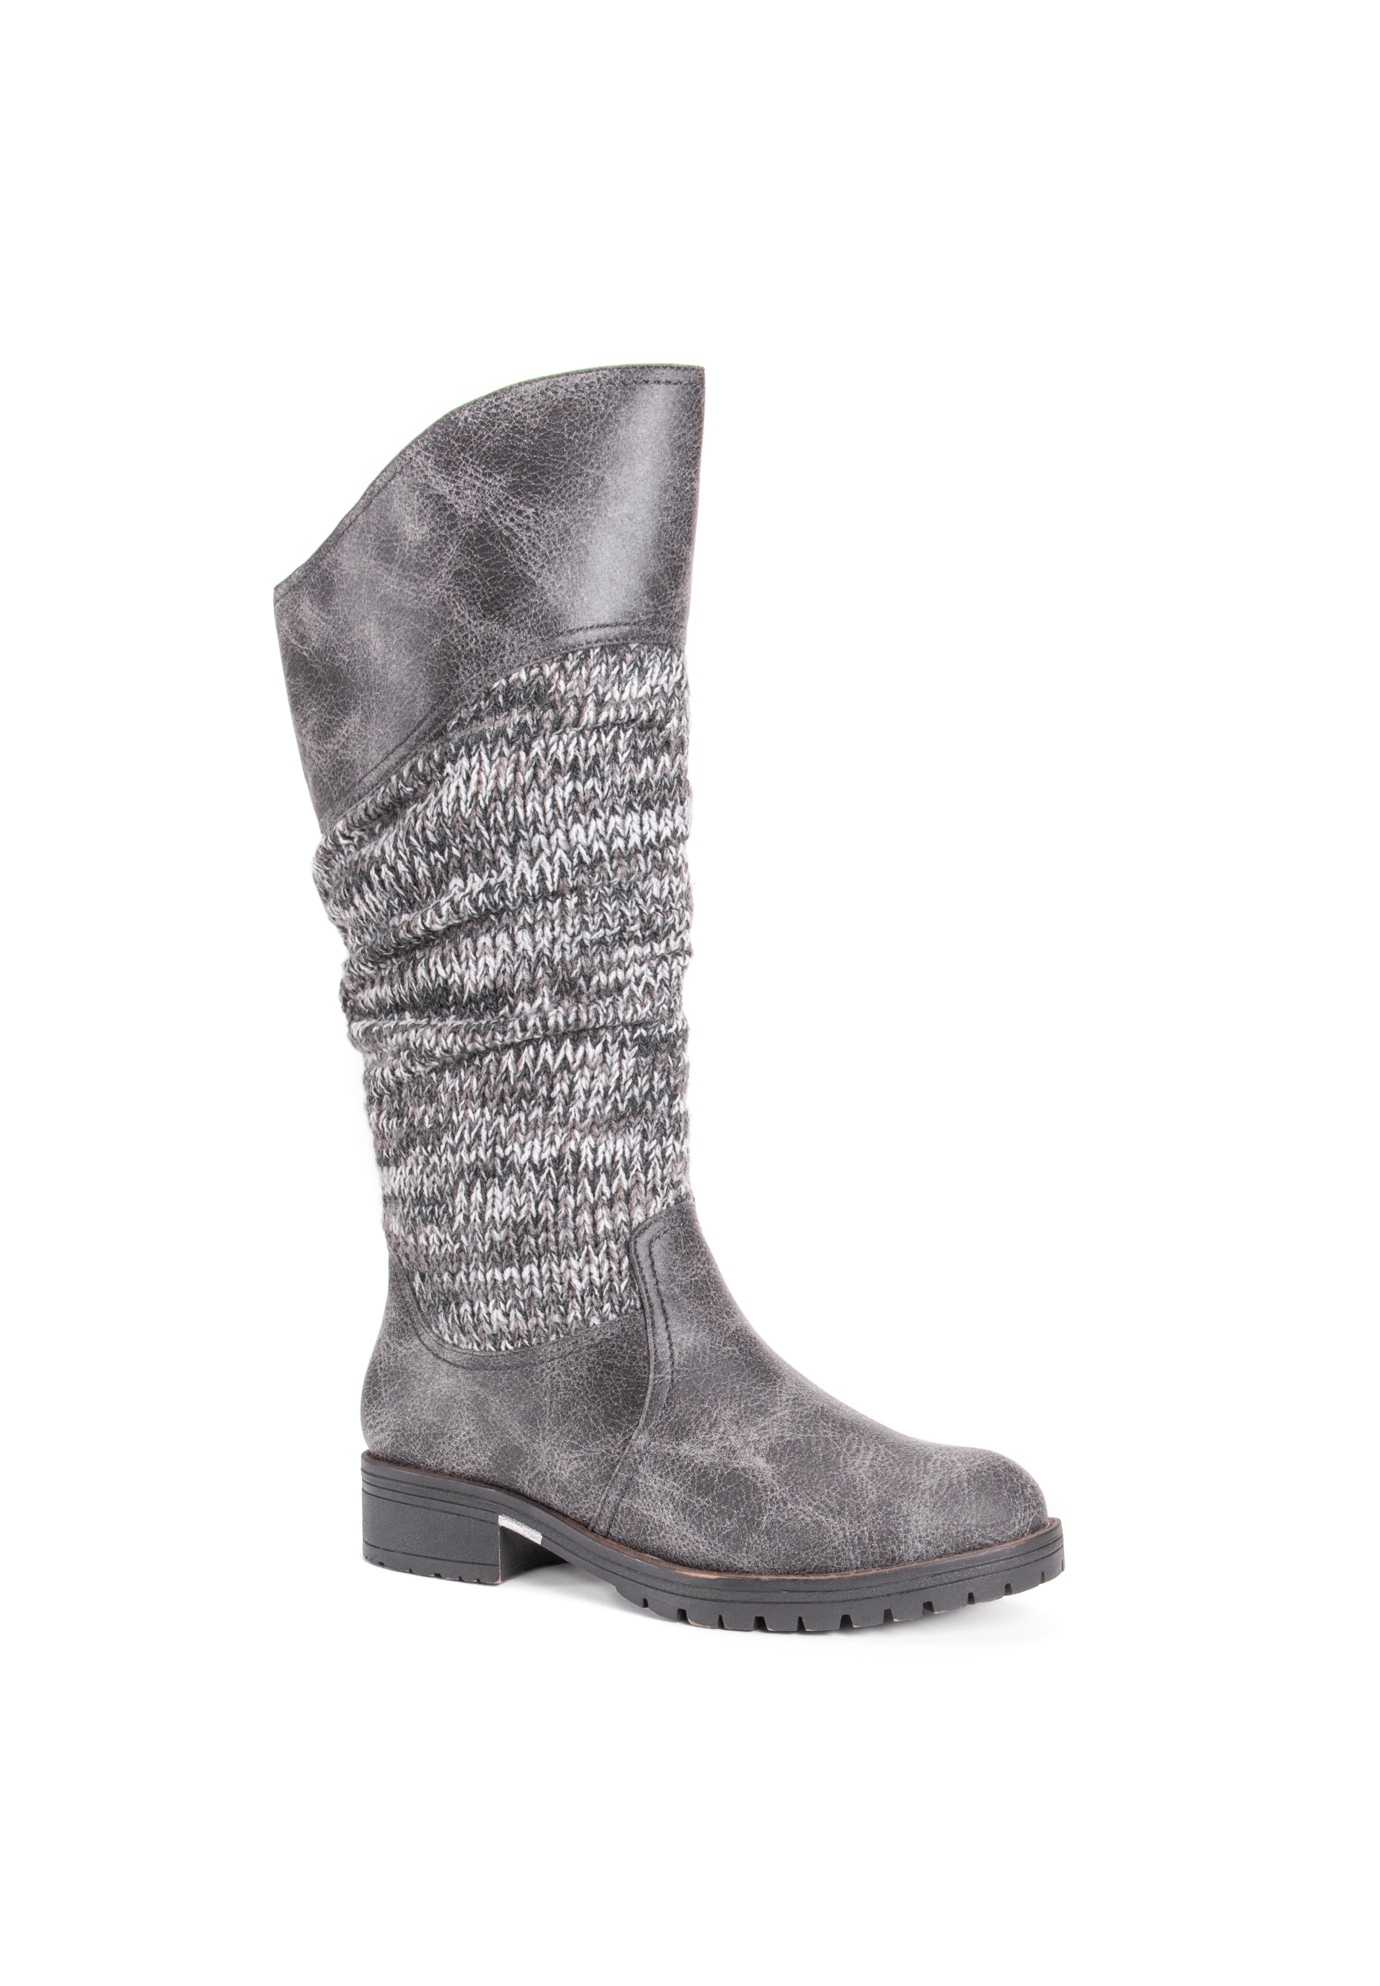 womens grey boots size 8